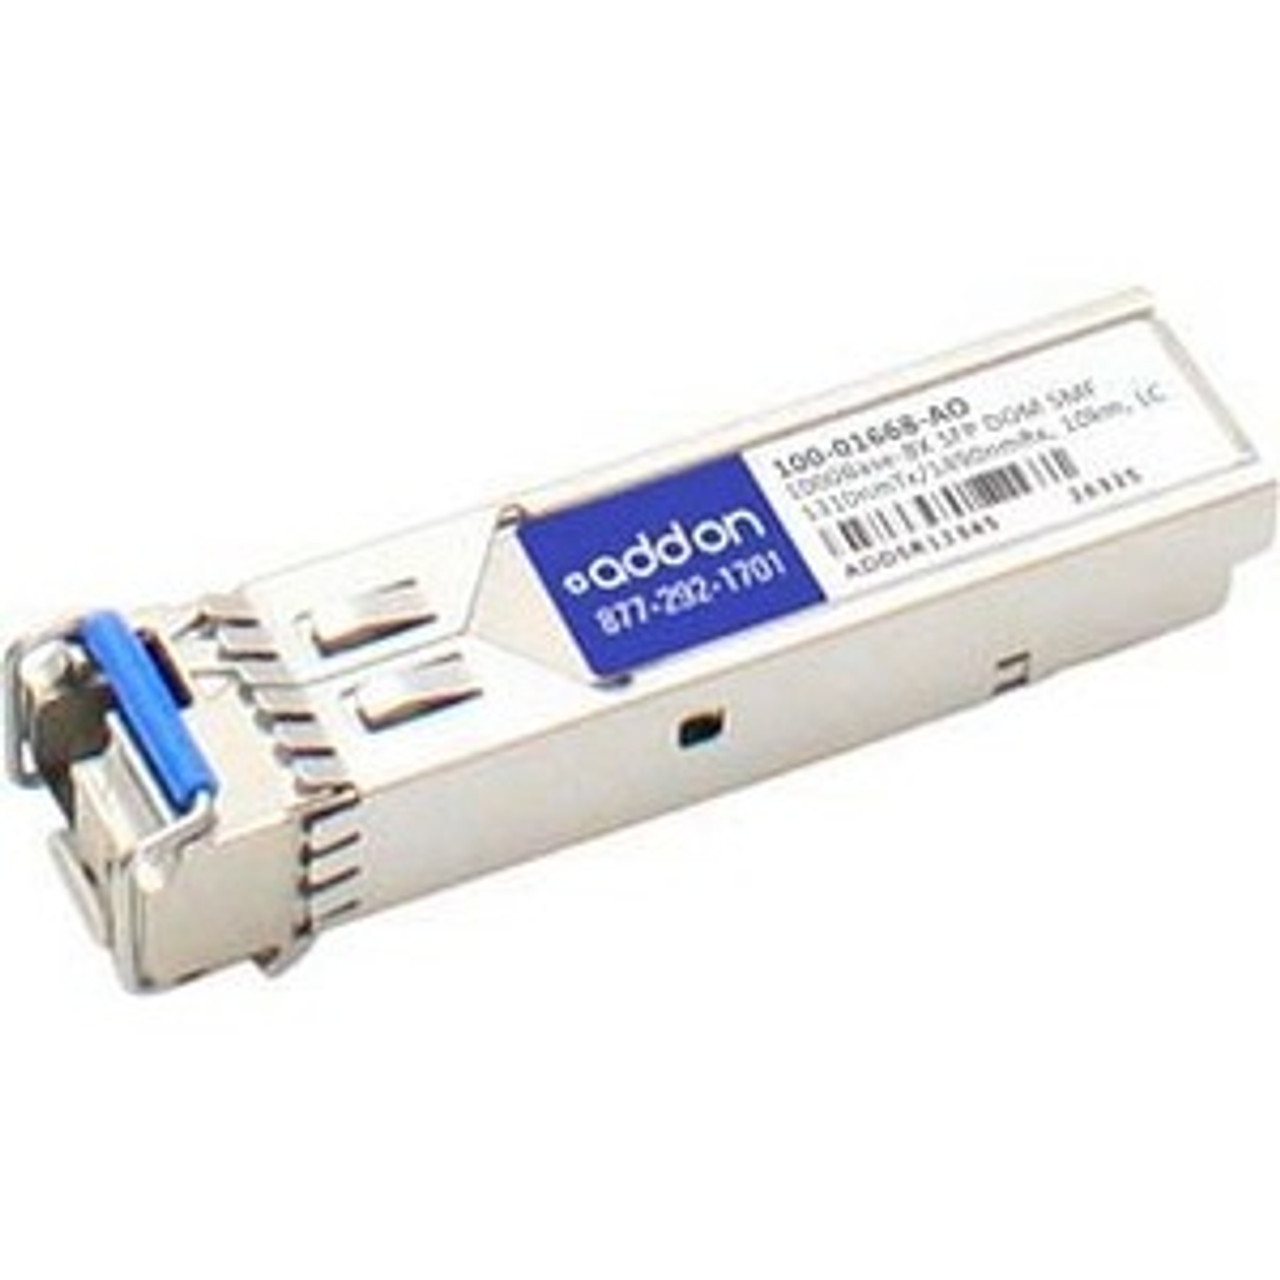 100-01668-AO AddOn 1.25Gbps 1000Base-BX-U Single-mode Fiber 20km 1310nmTX/1490nmRX LC Connector SFP Transceiver Module for Calix Compatible